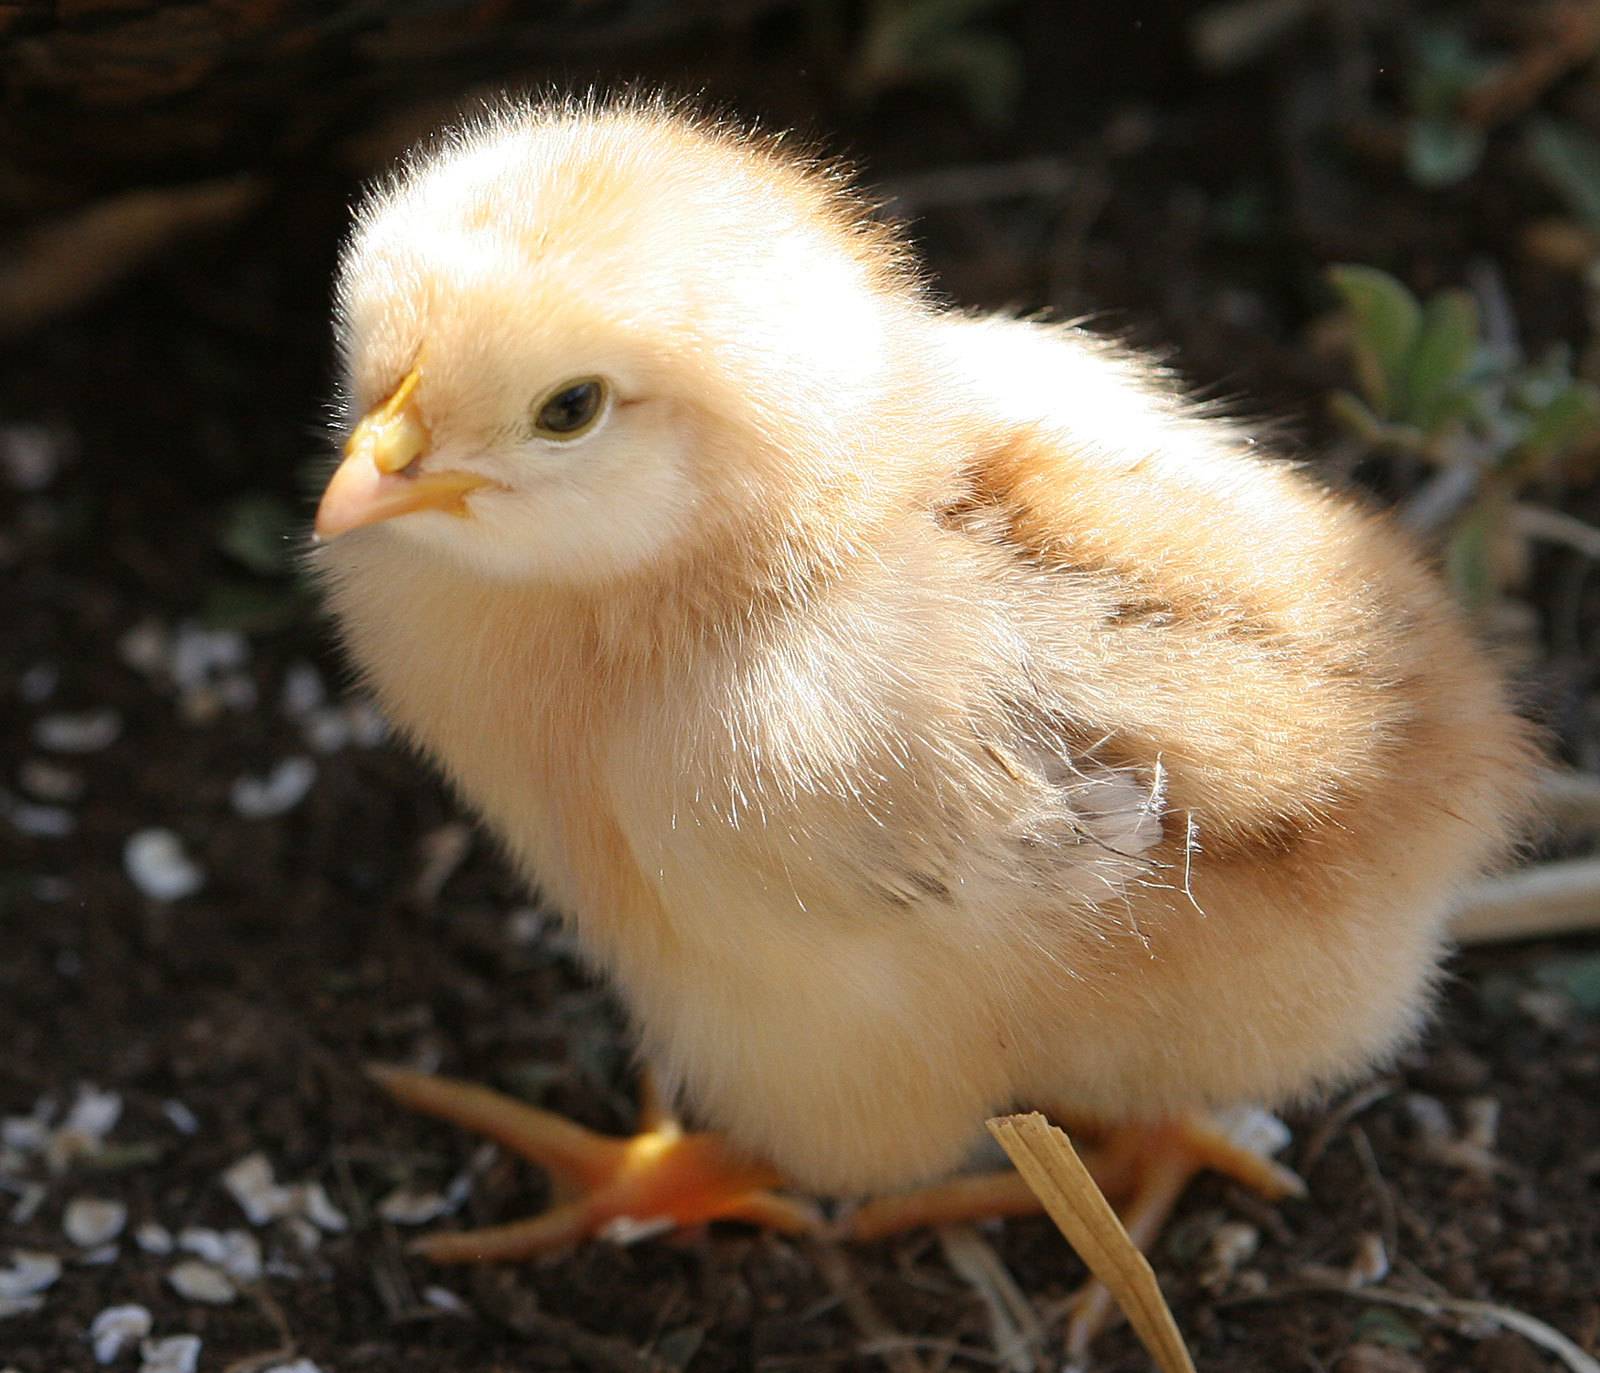 Baby Chicks Reject Escher-esque Impossible Shapes